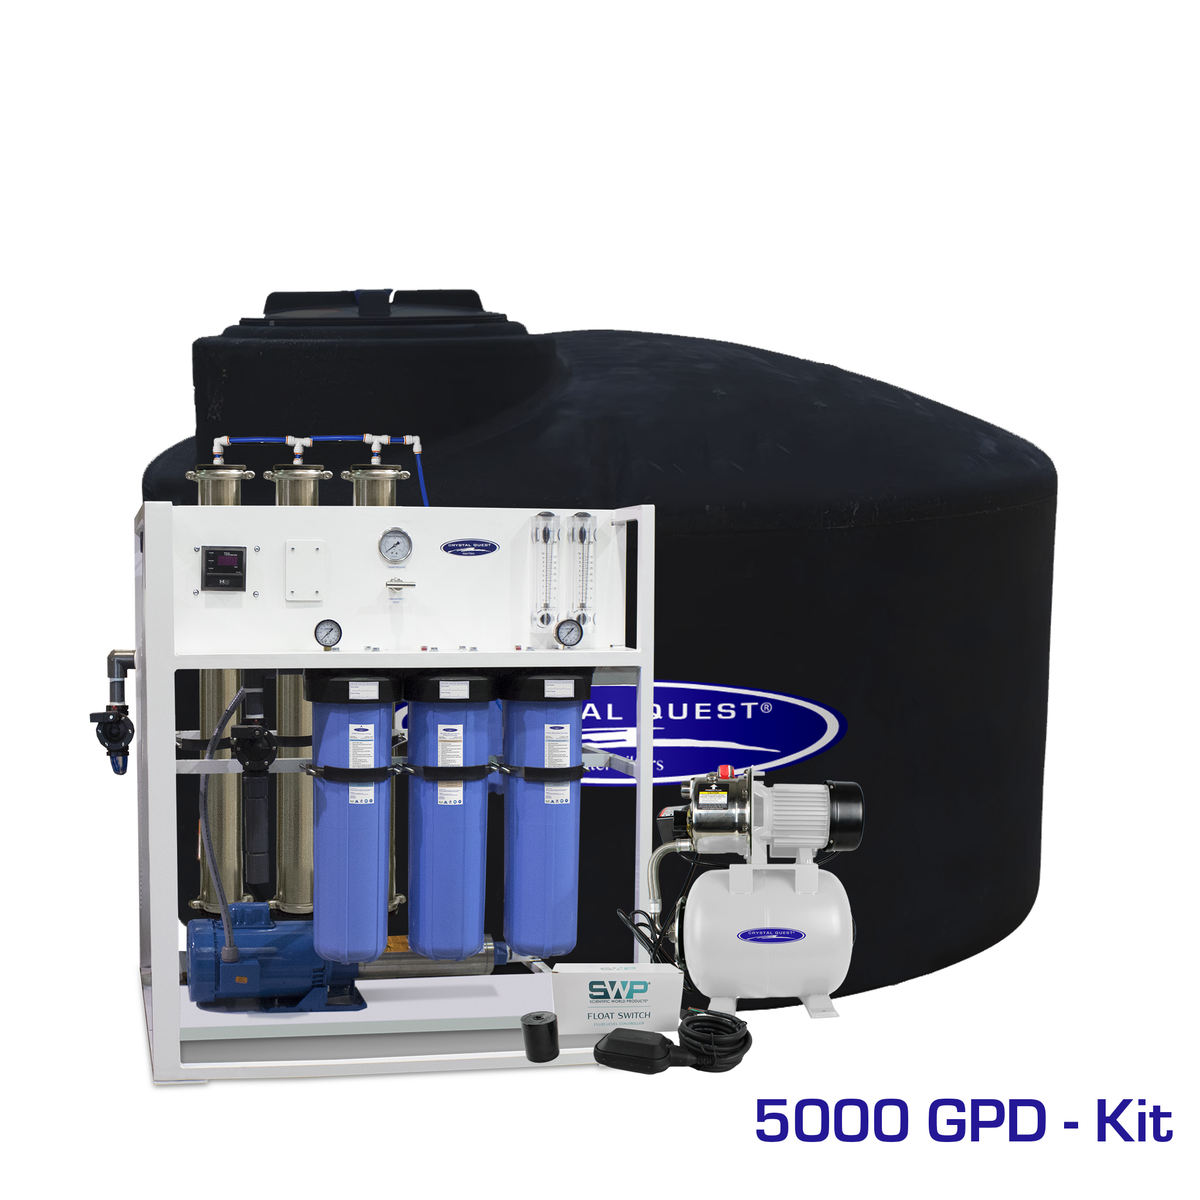 5,000 GPD / Add Storage Tank Kit (550 Gal) Medical Mid-Flow Reverse Osmosis System (500-7000 GPD) - Commercial - Crystal Quest